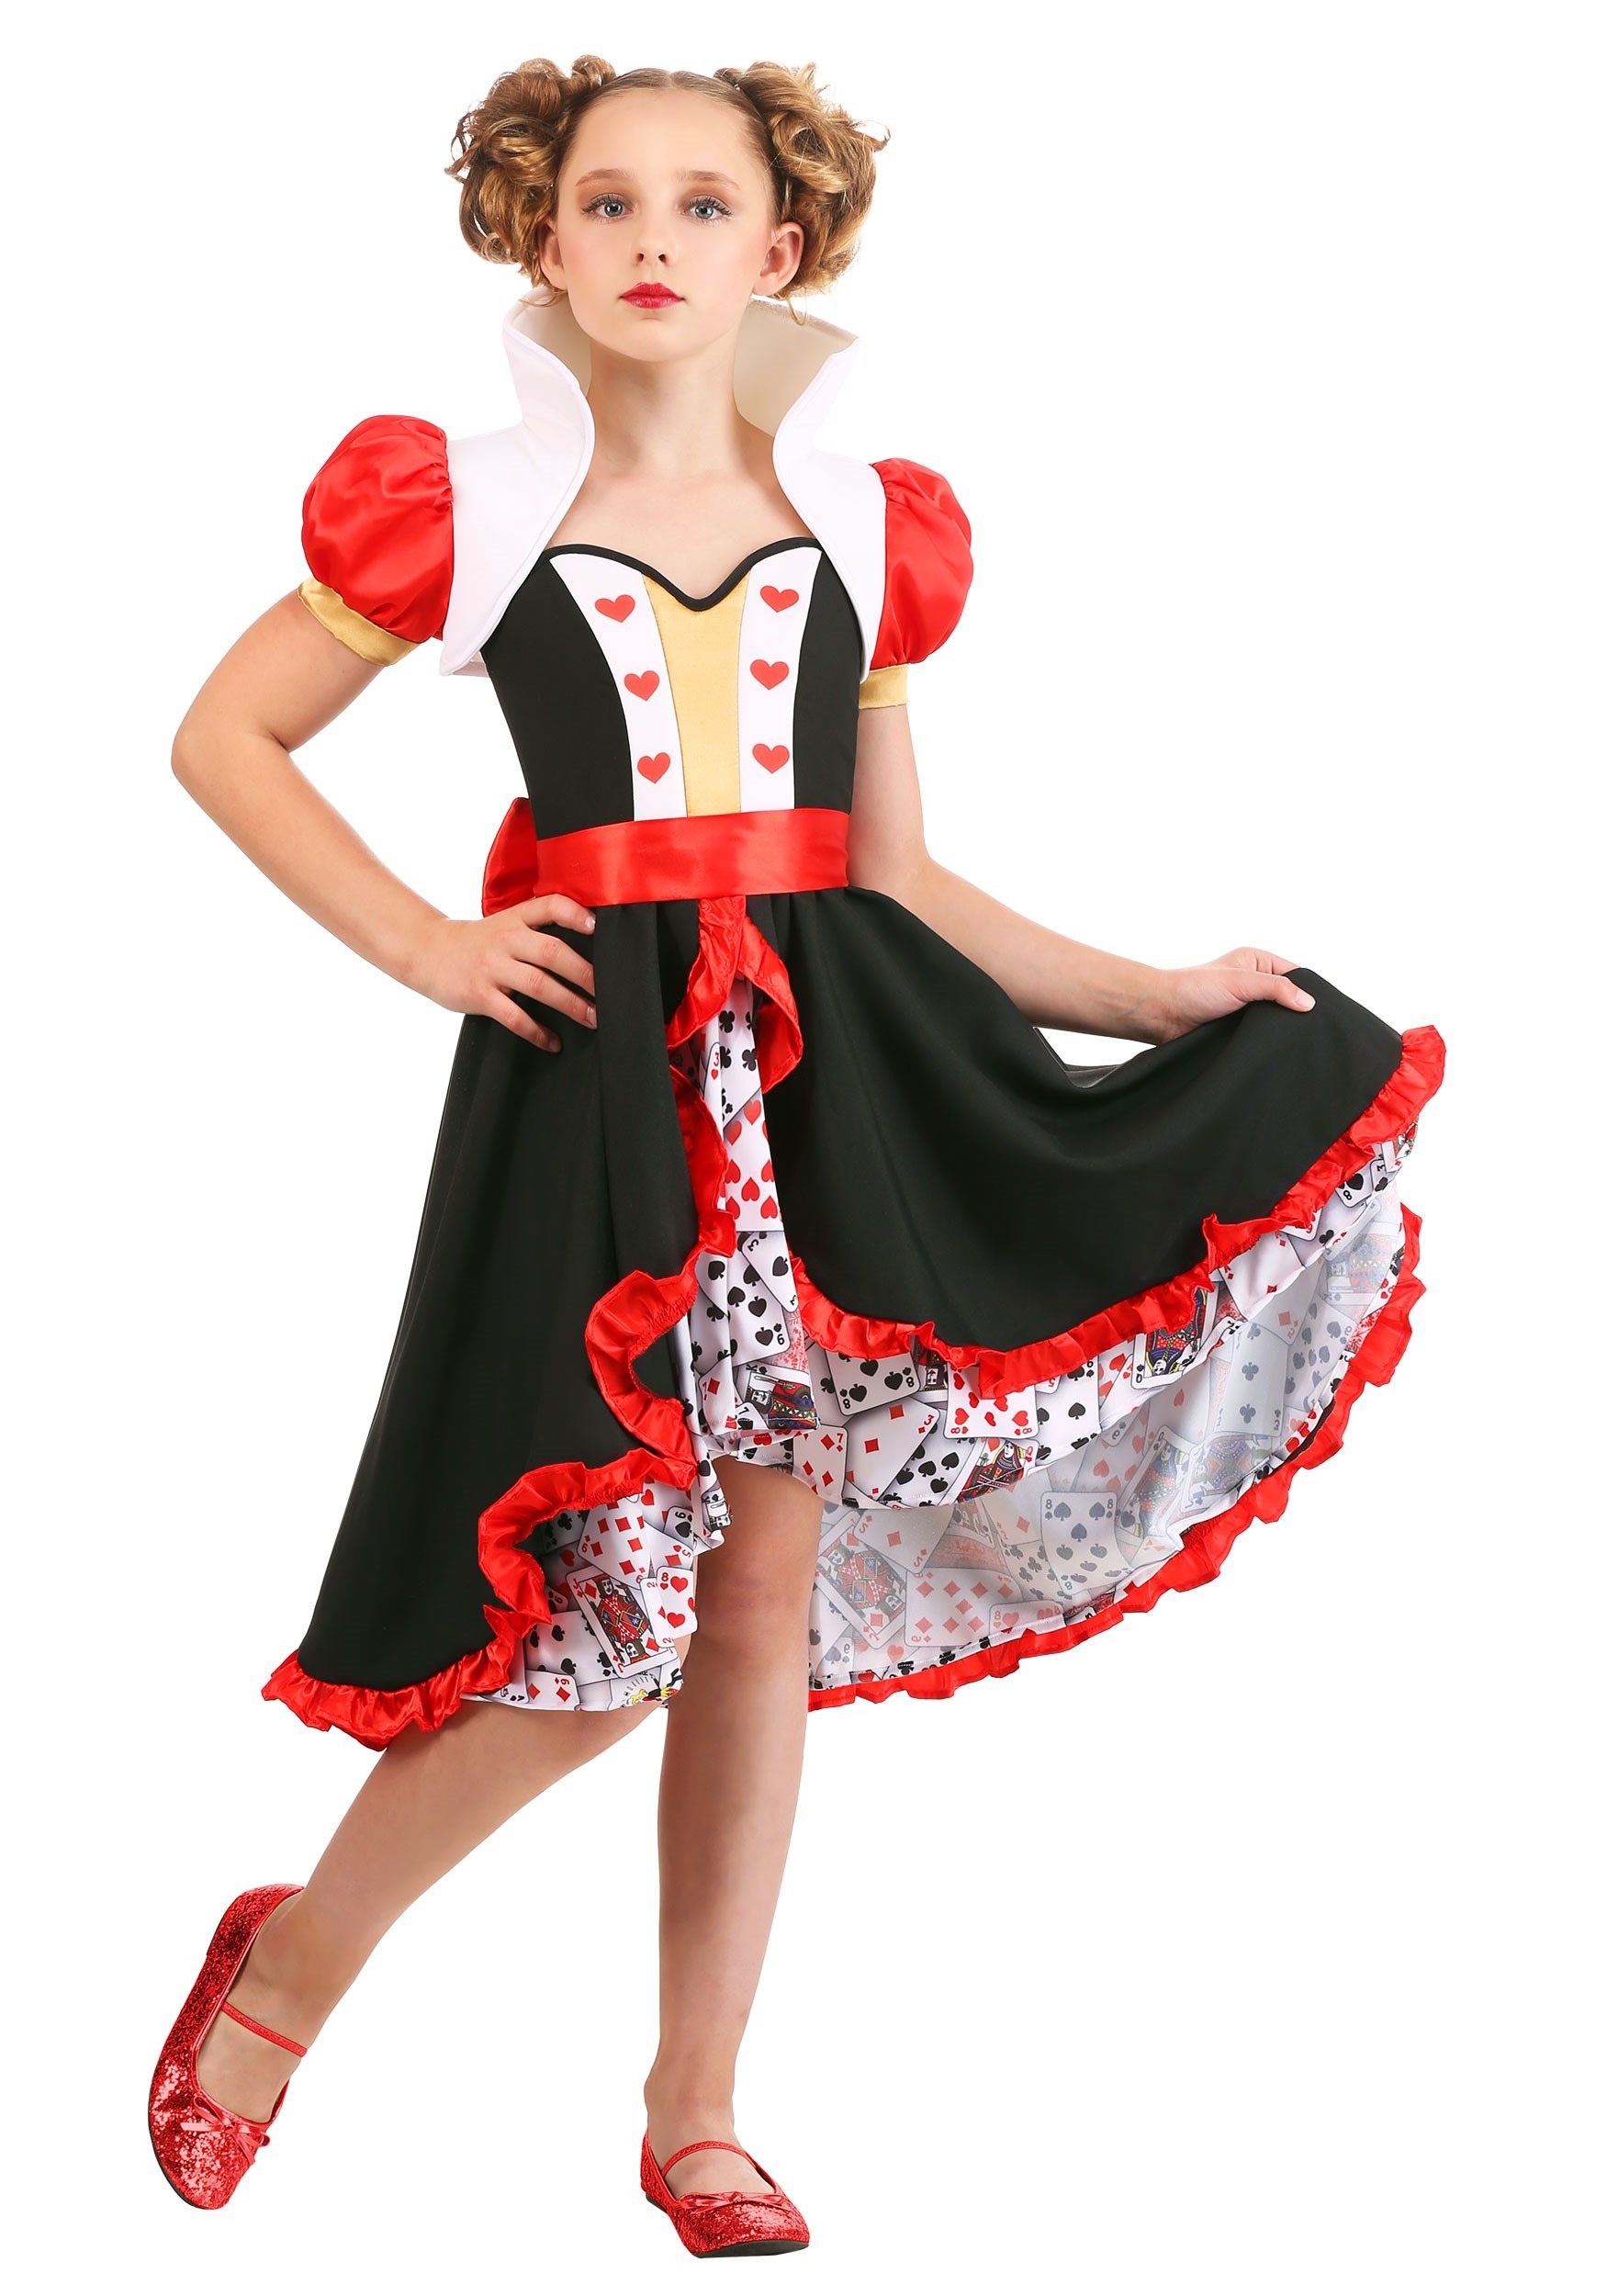 Photos - Fancy Dress FUN Costumes Queen of Hearts Girl's Frilly Costume Black/Red/White